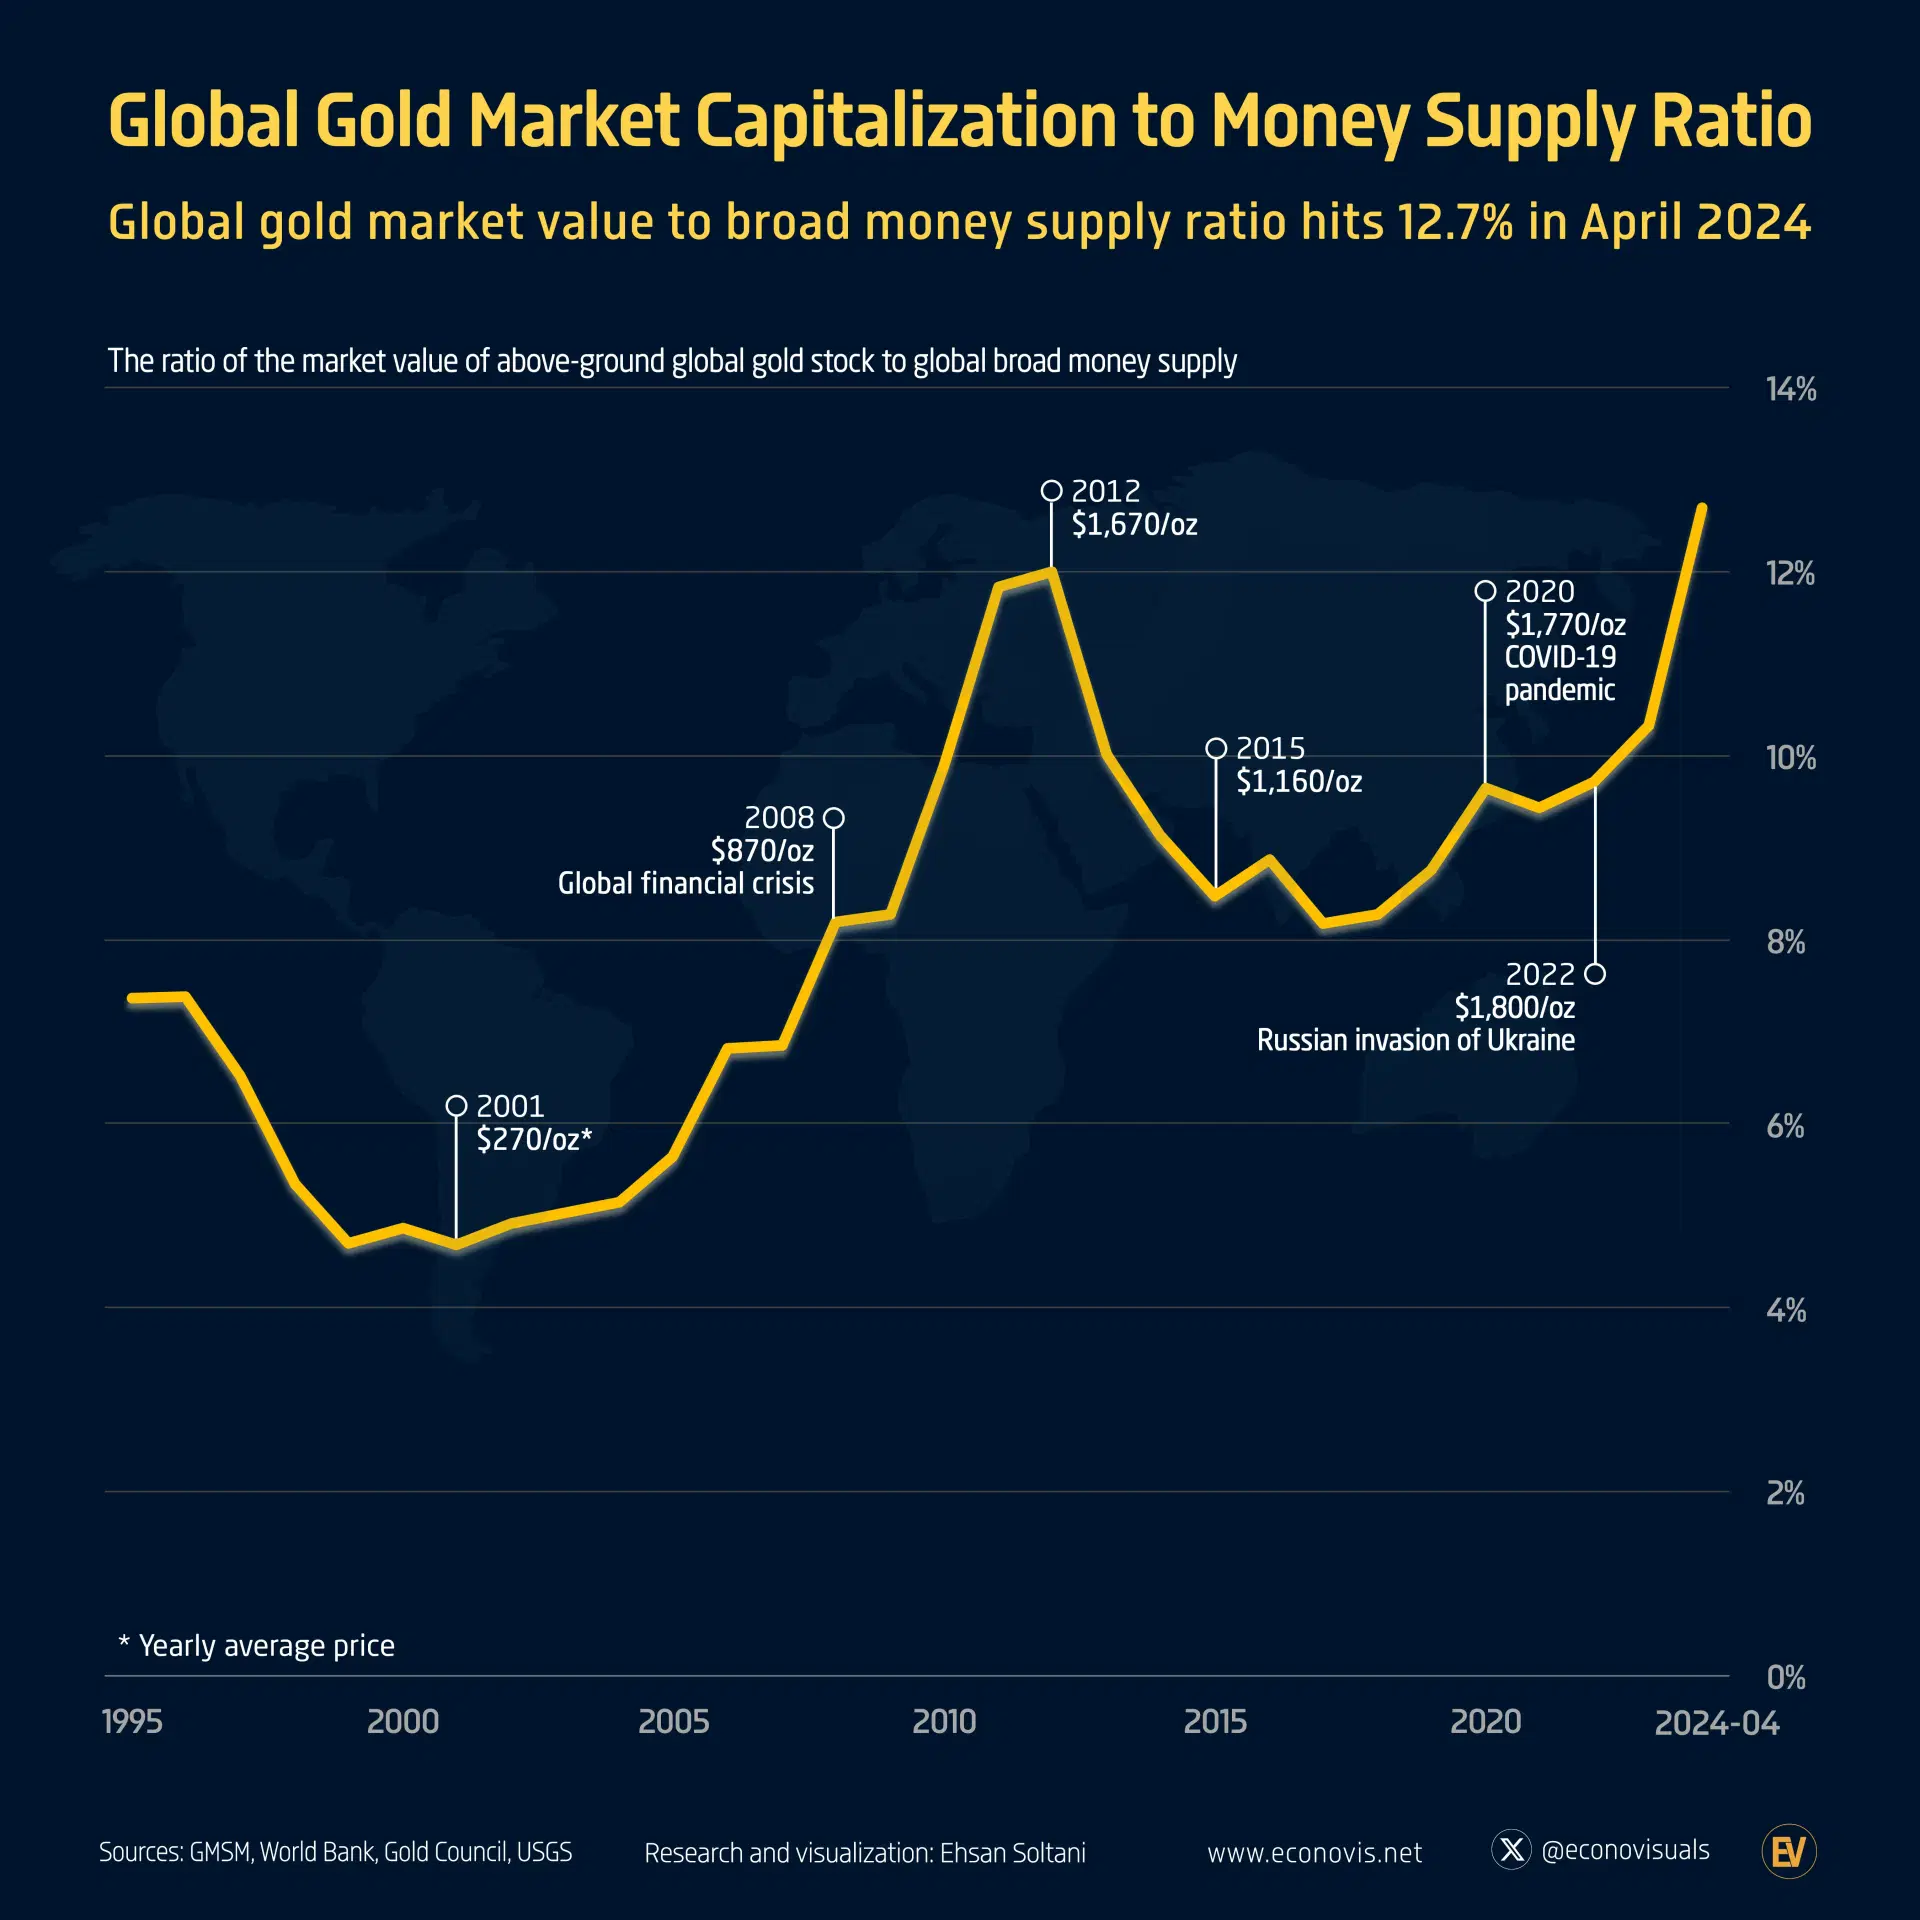 Global Gold Market Capitalization to Money Supply Ratio